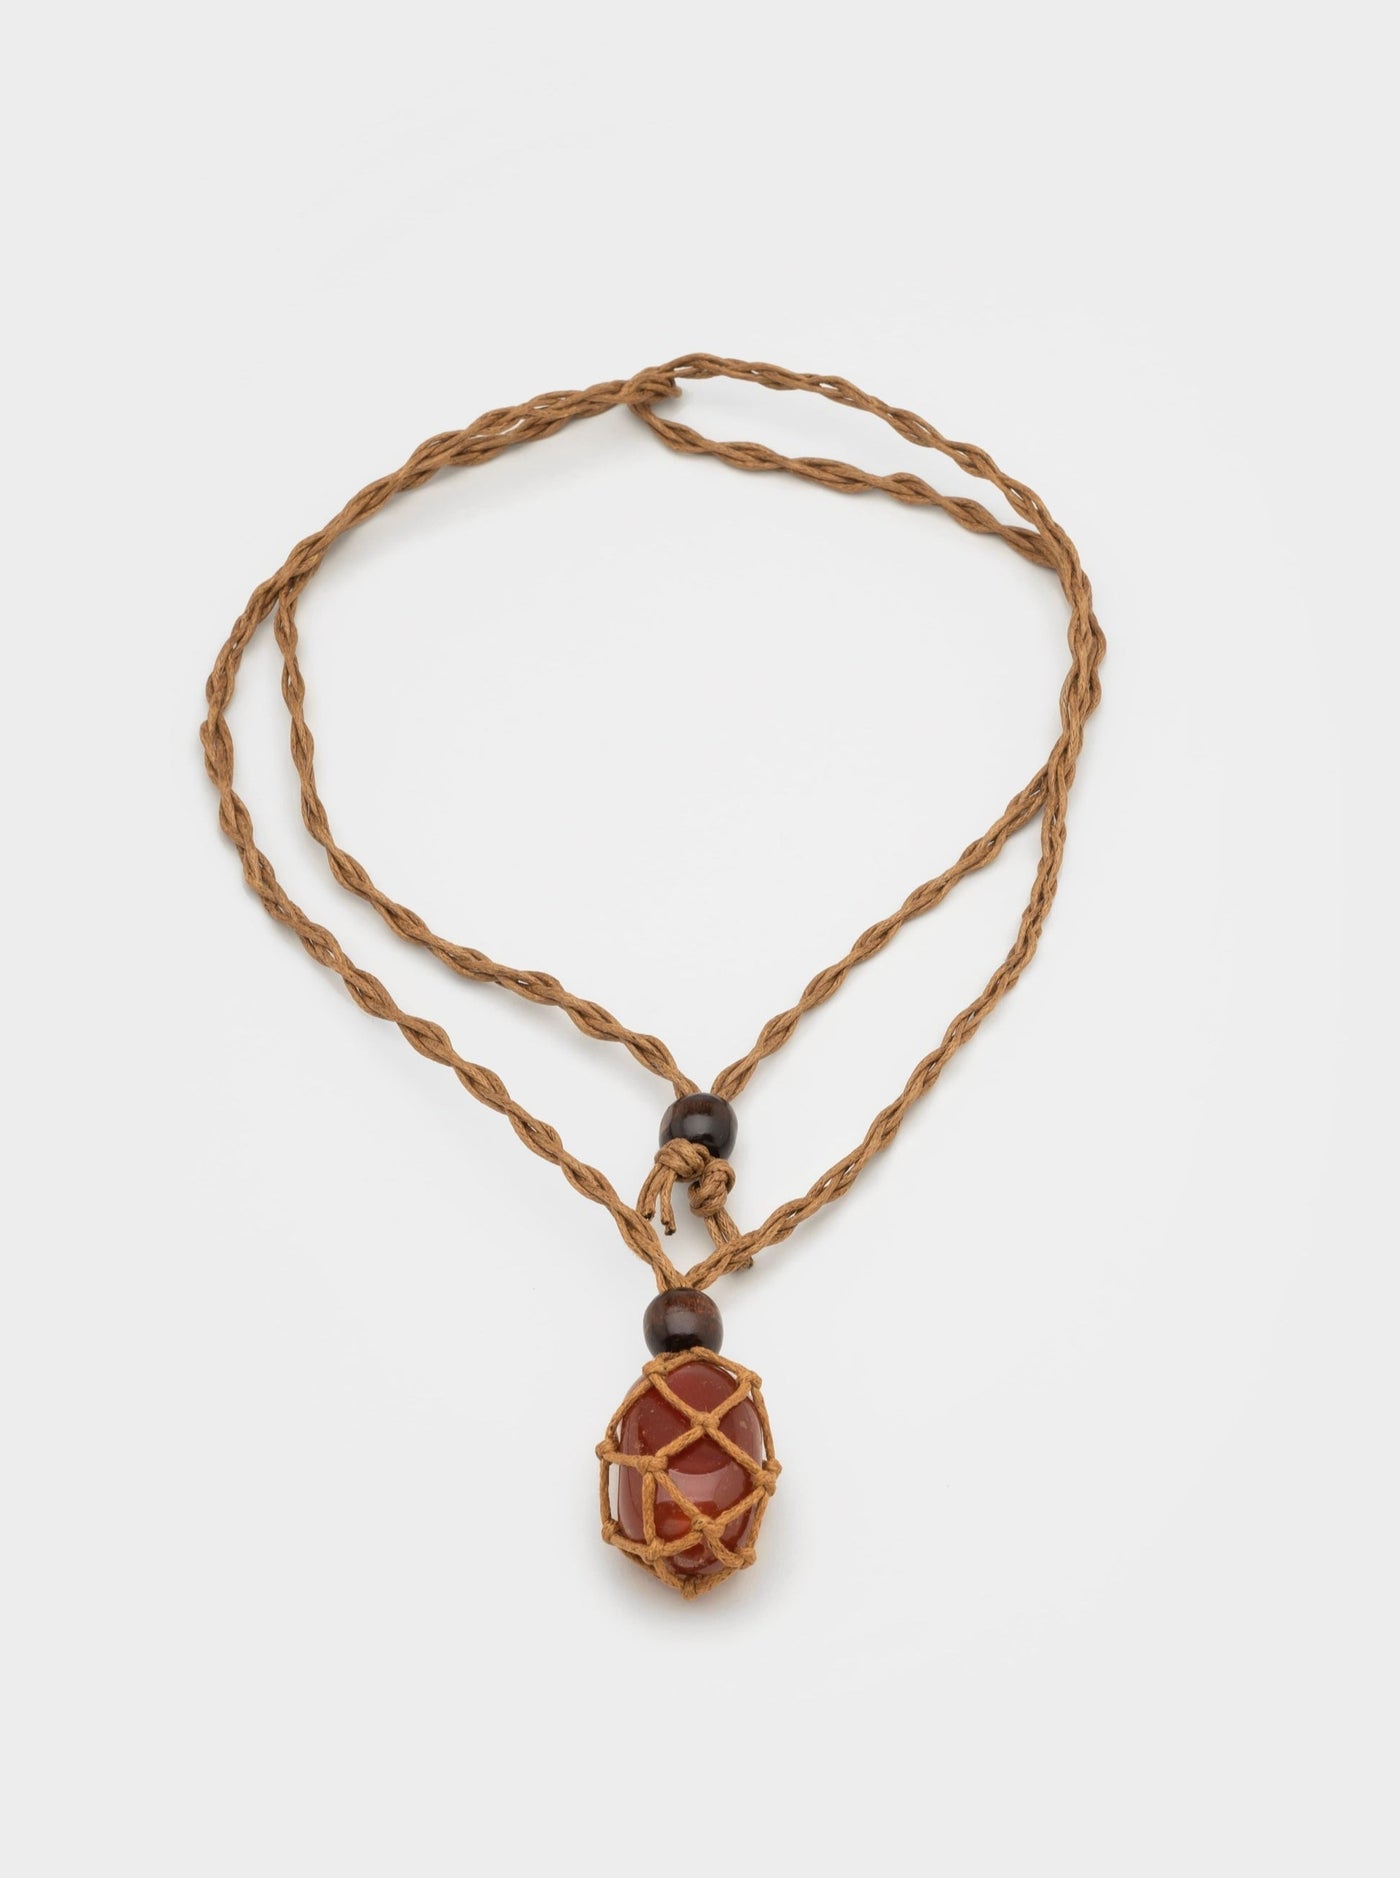 Necklace with cord chain and caged brown stone pendant